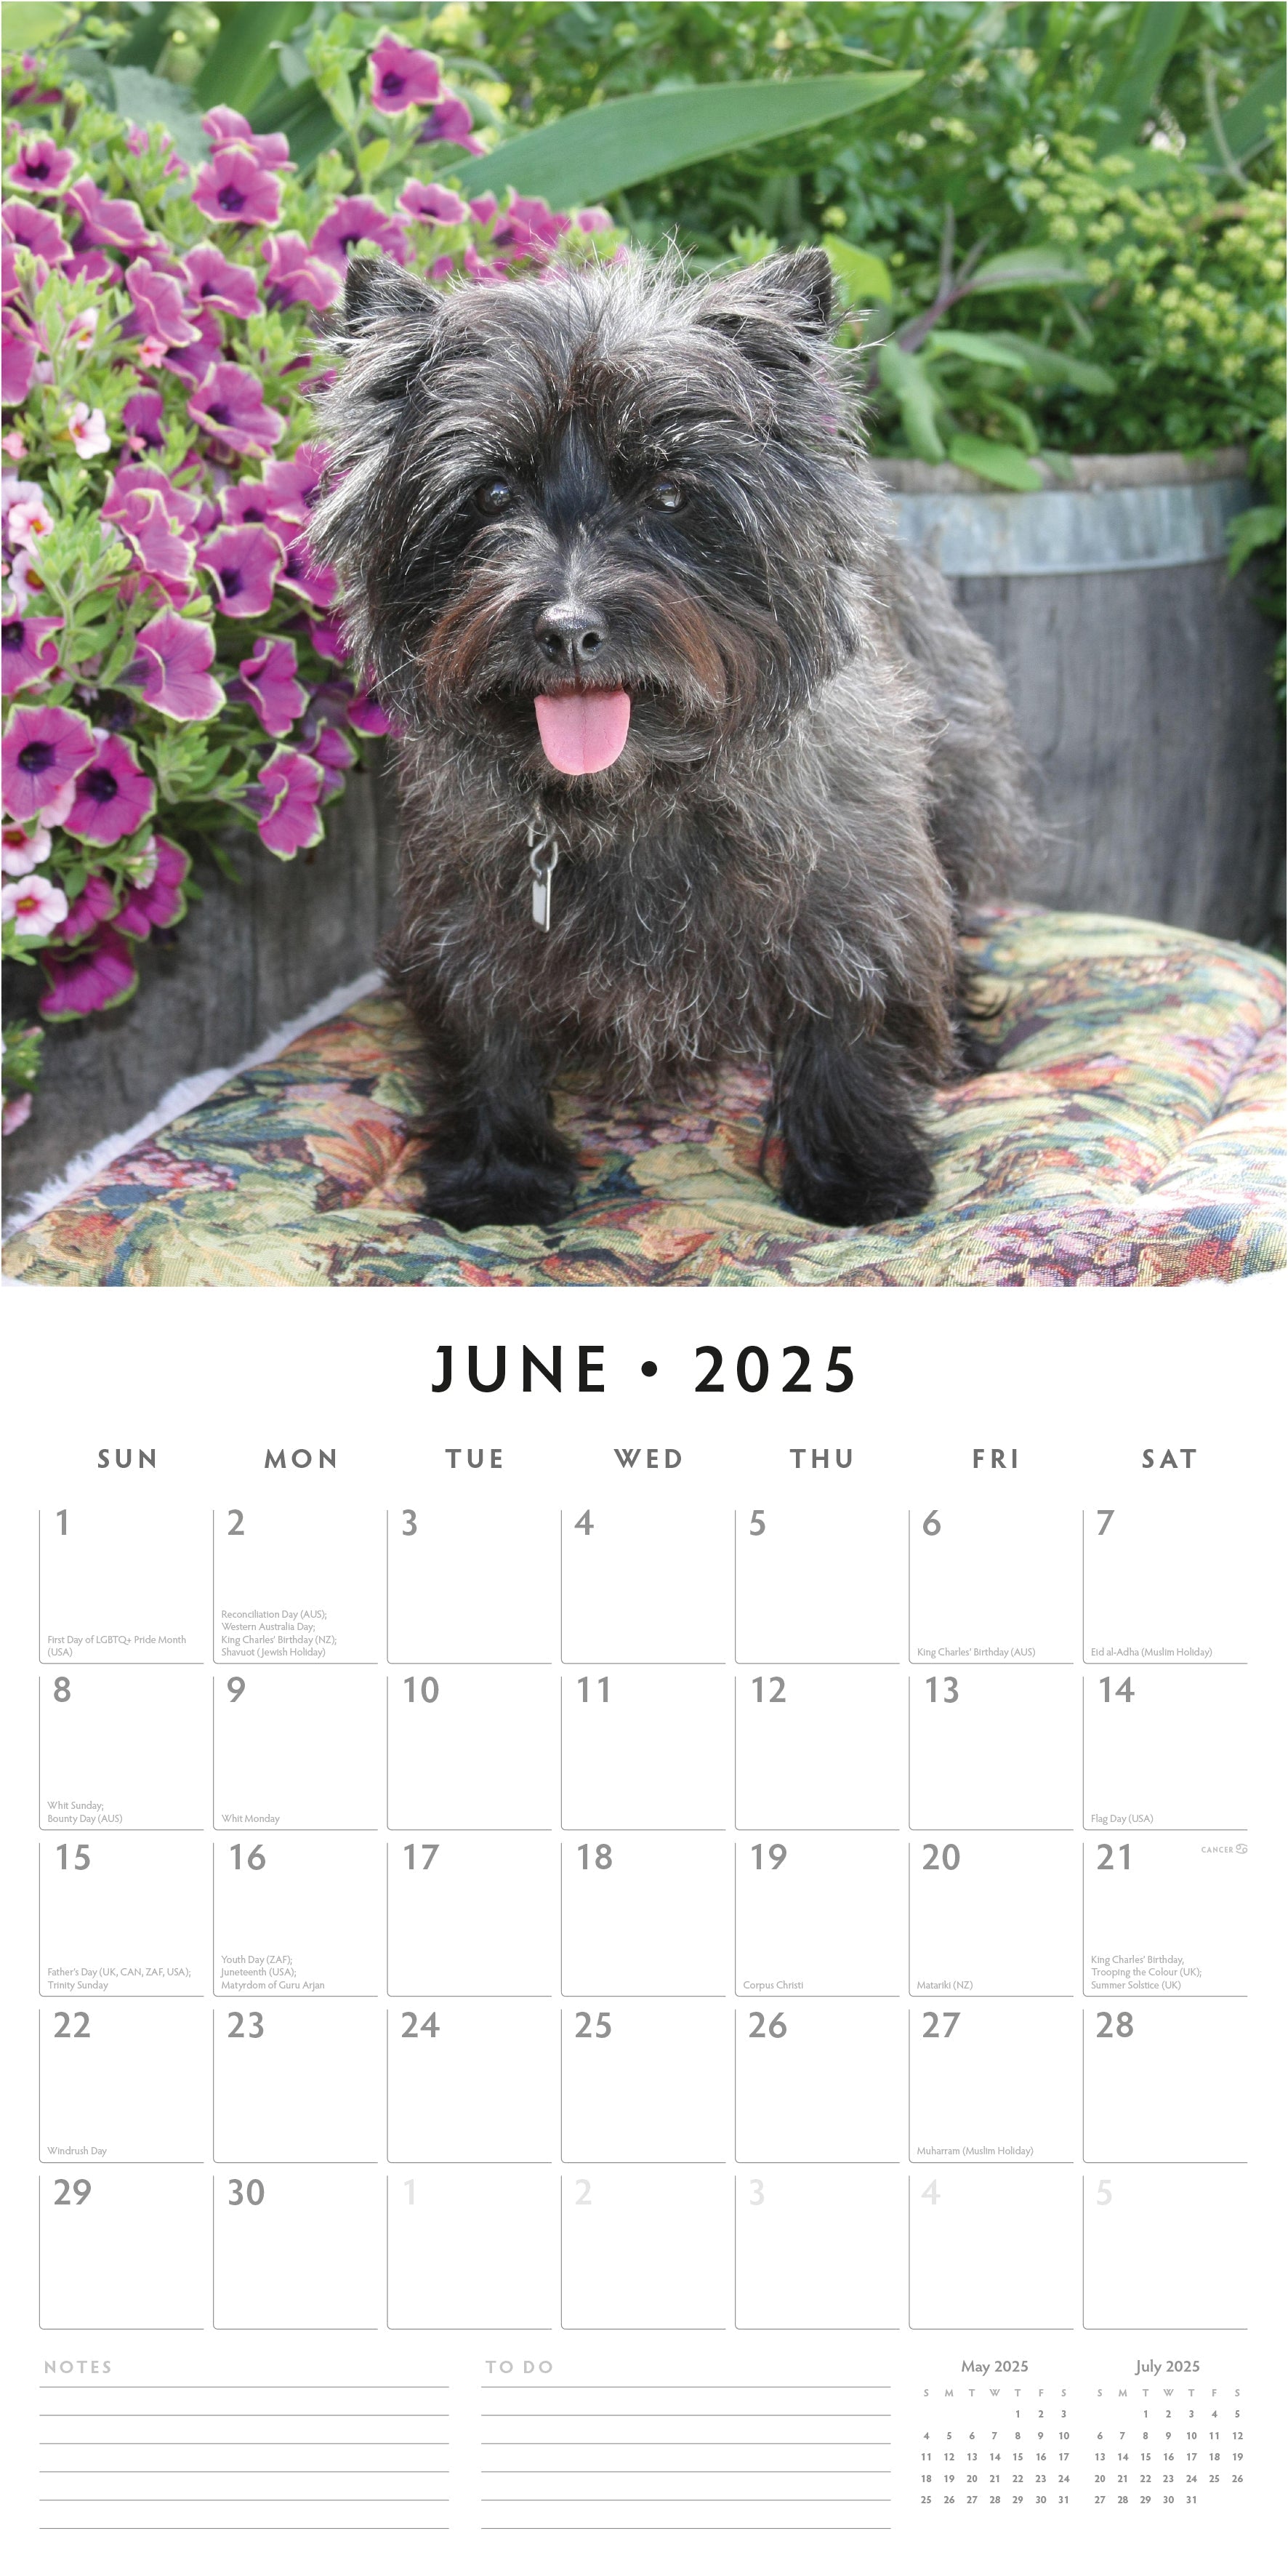 2025 Cairn Terriers - Square Wall Calendar